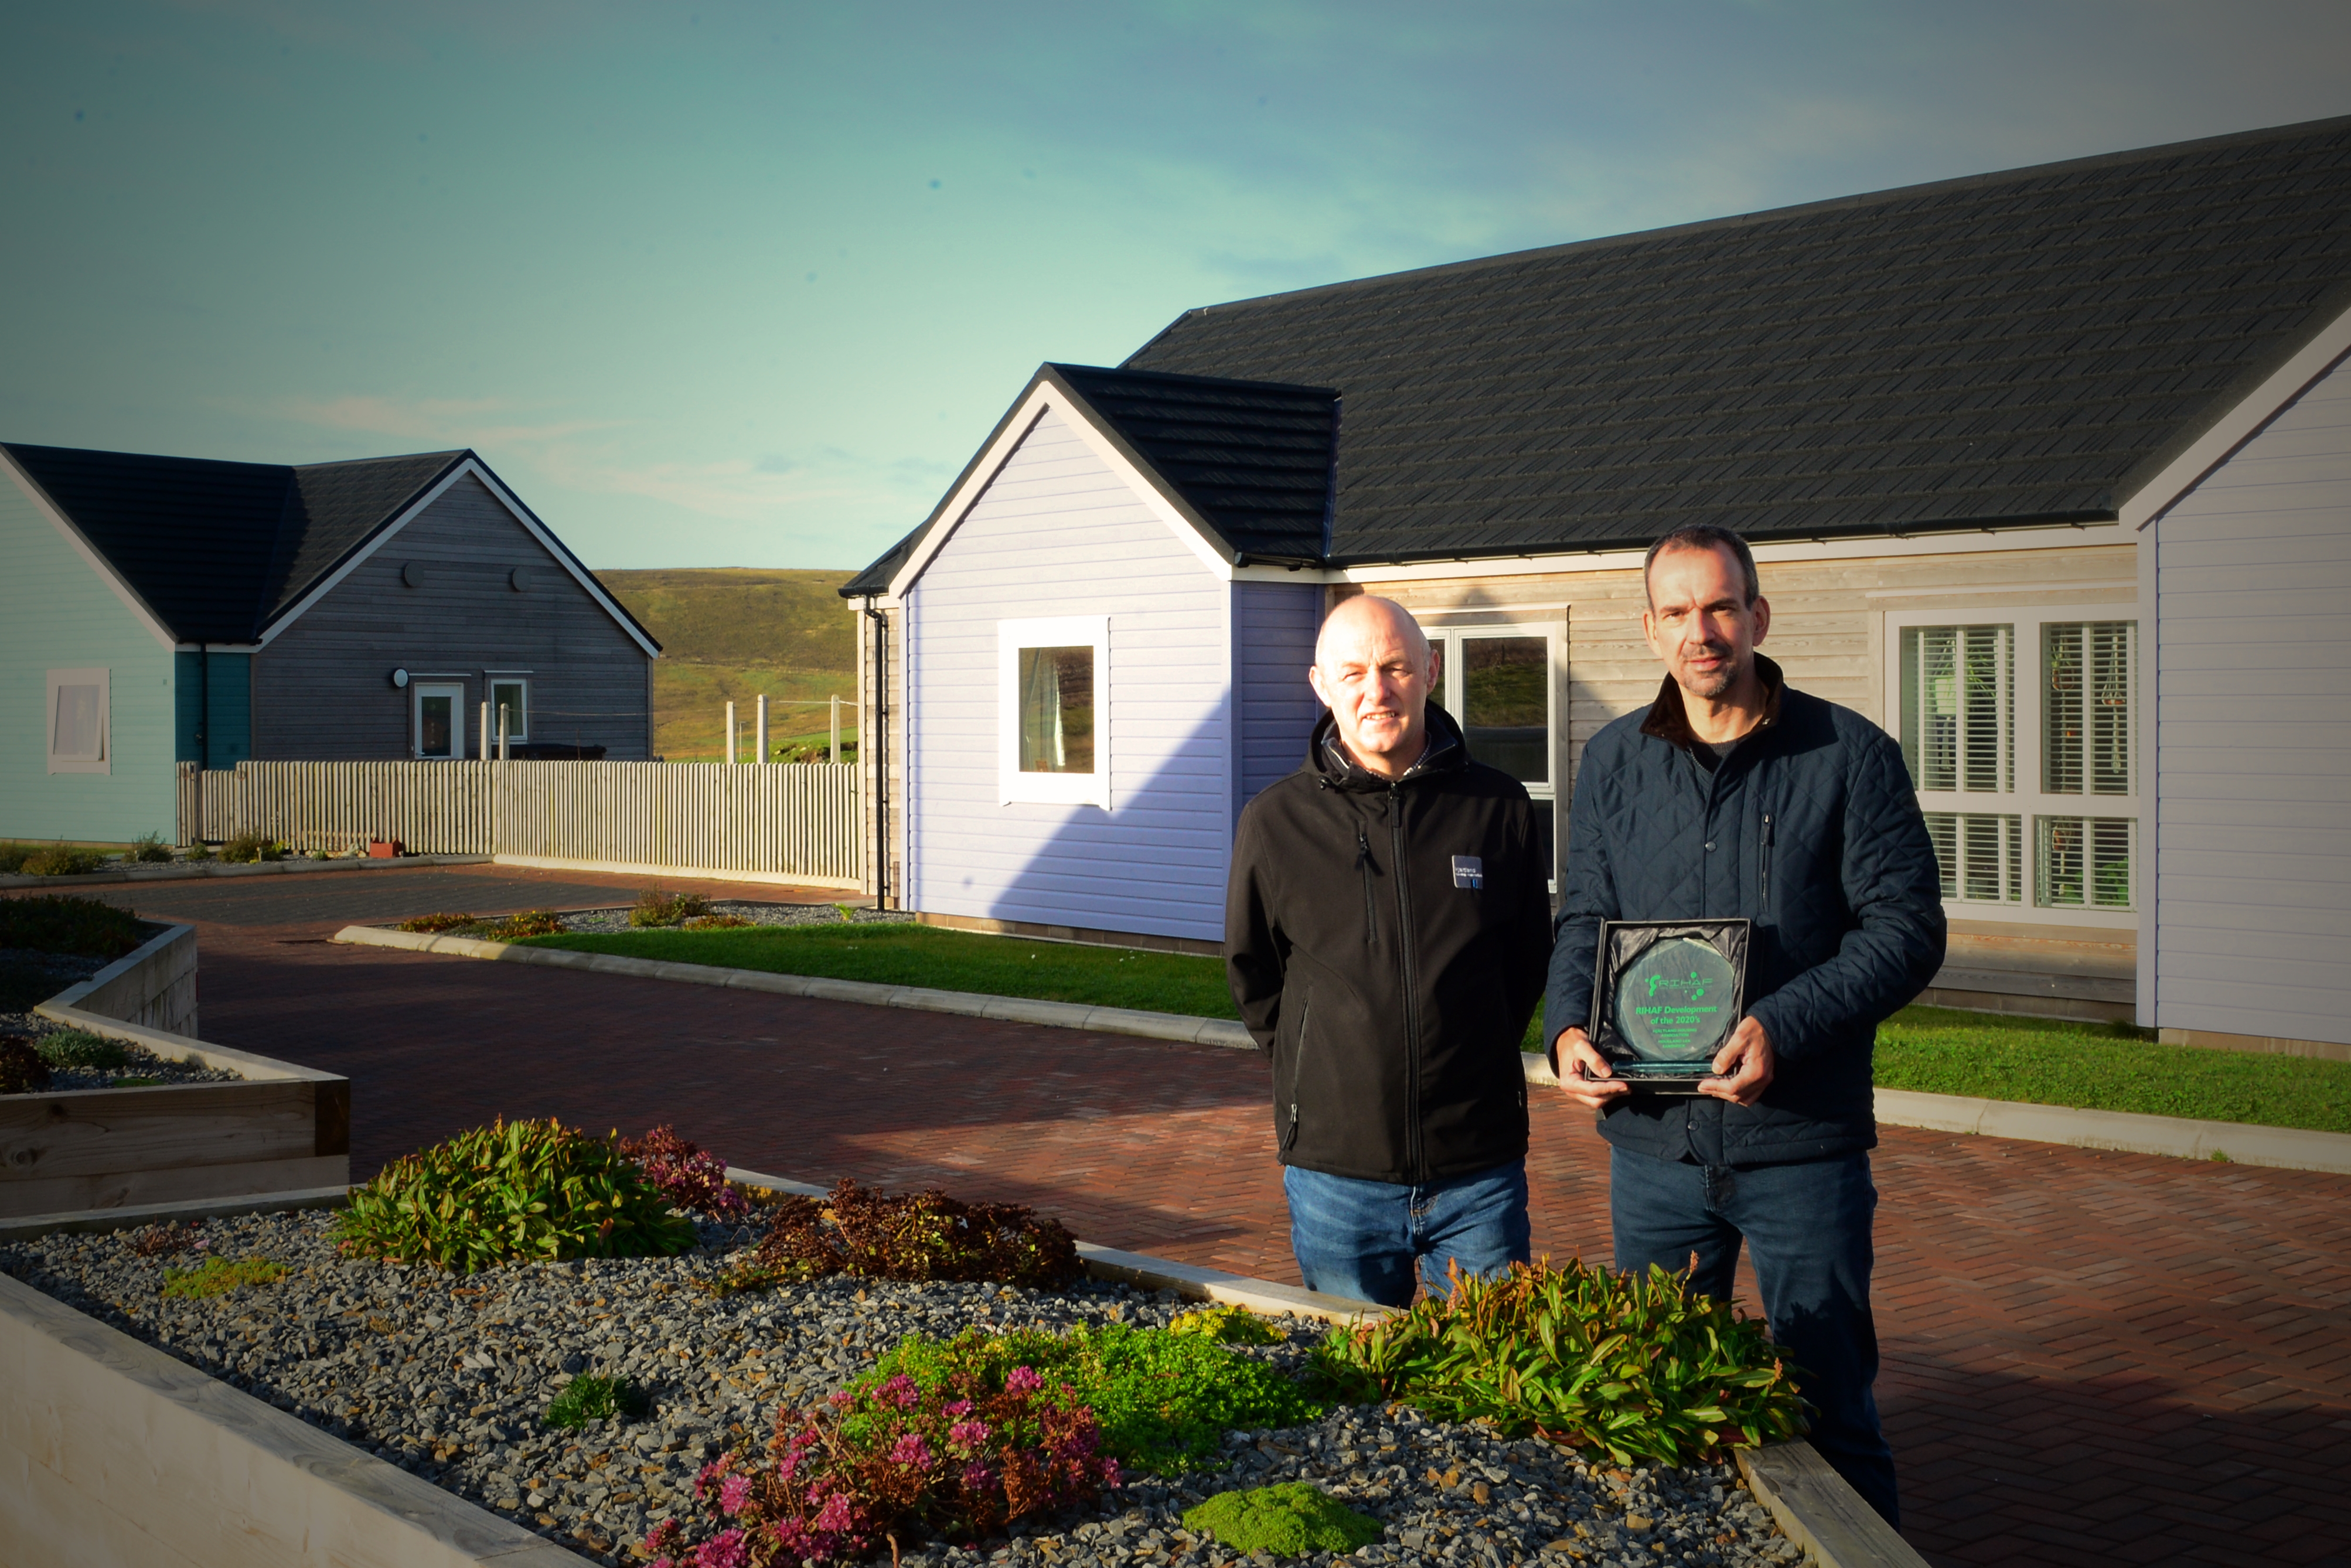 Two Hjaltland new build projects receive community contribution awards